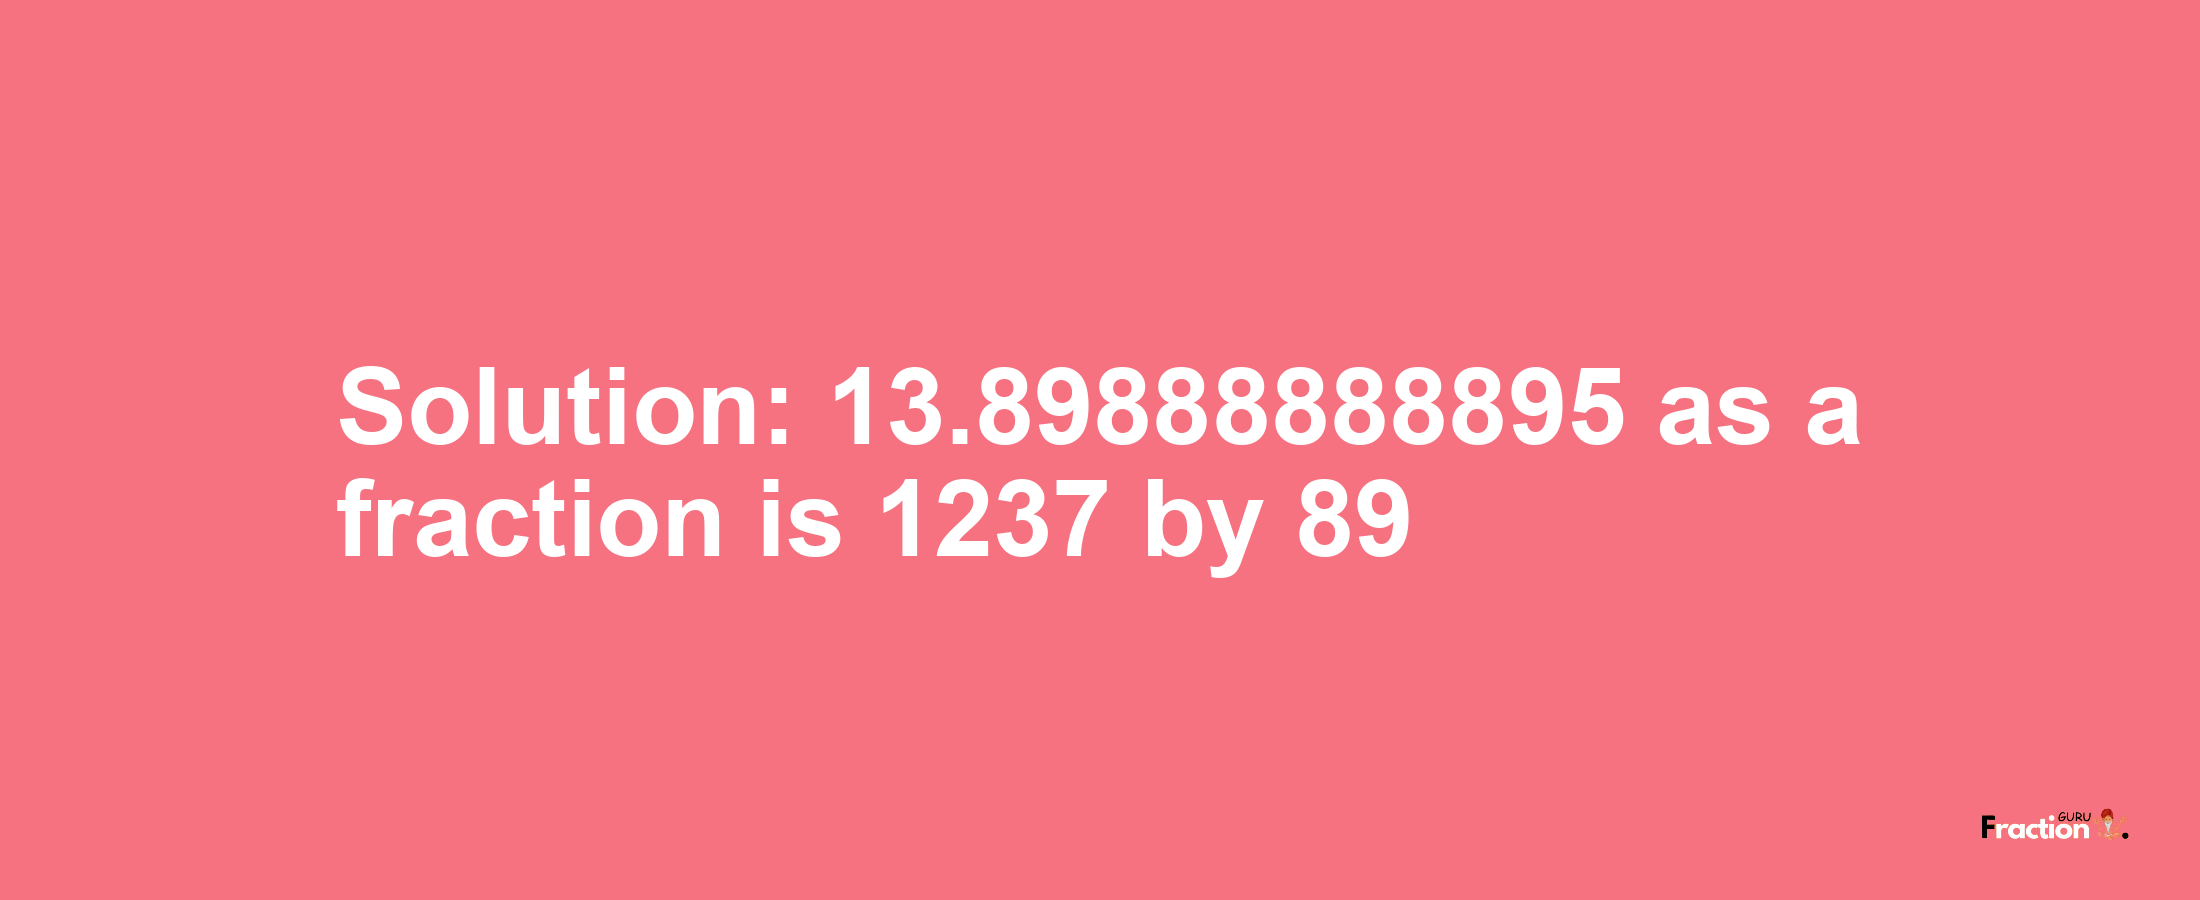 Solution:13.89888888895 as a fraction is 1237/89